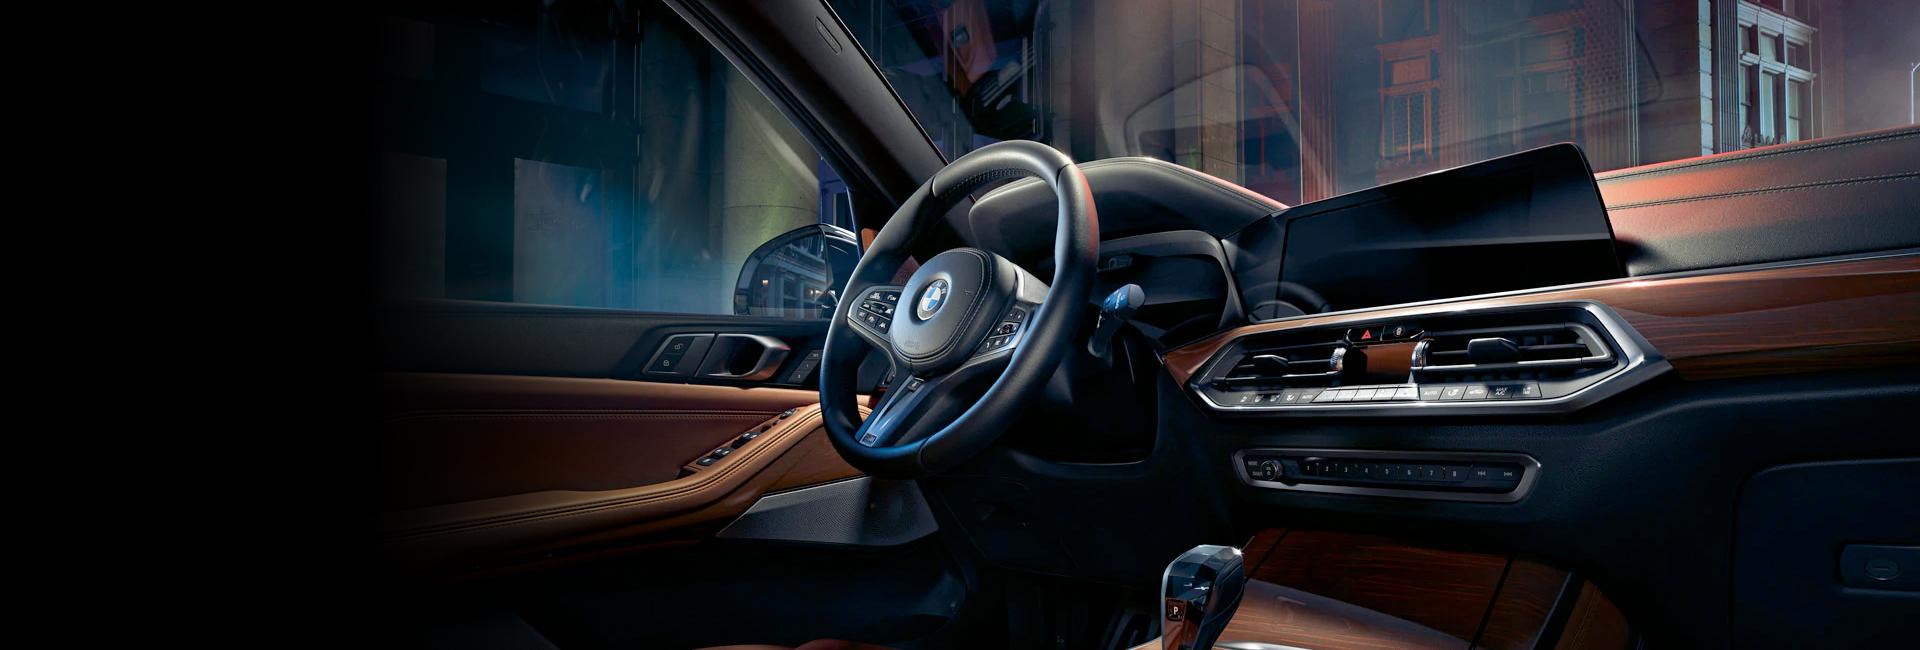 Full interior view of the 2021 BMW X5